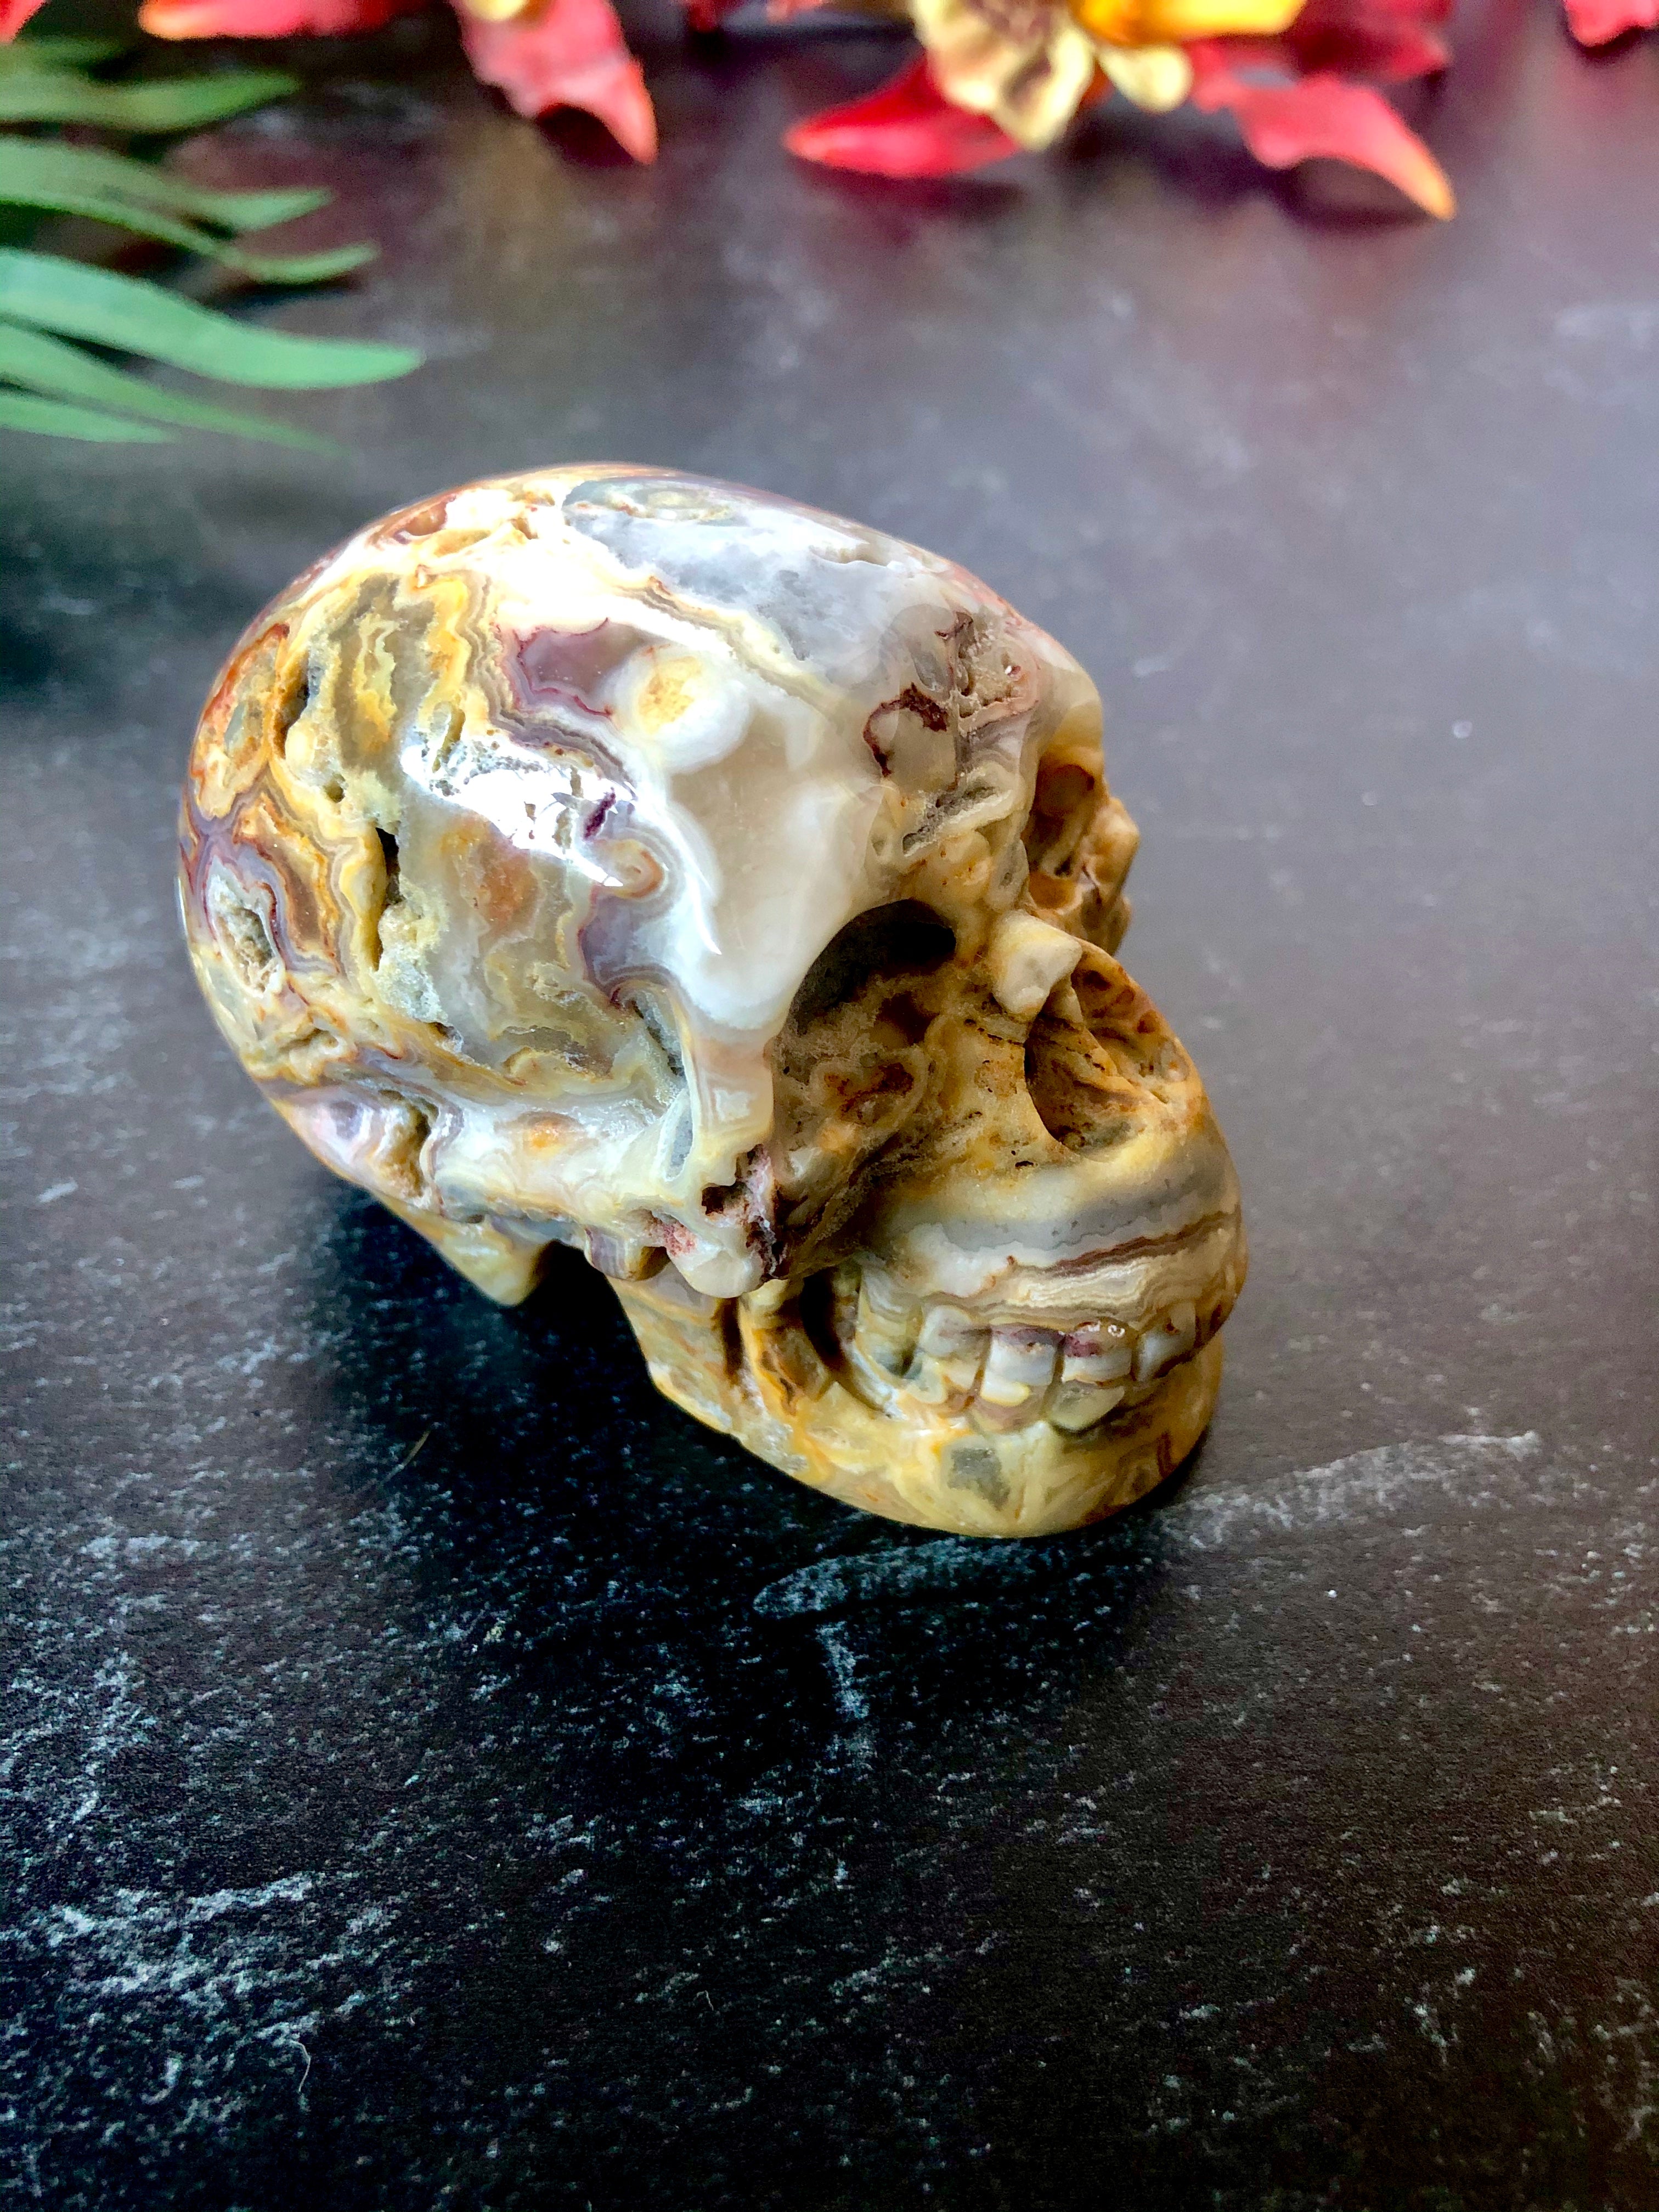 Crazy Lace Agate Skull